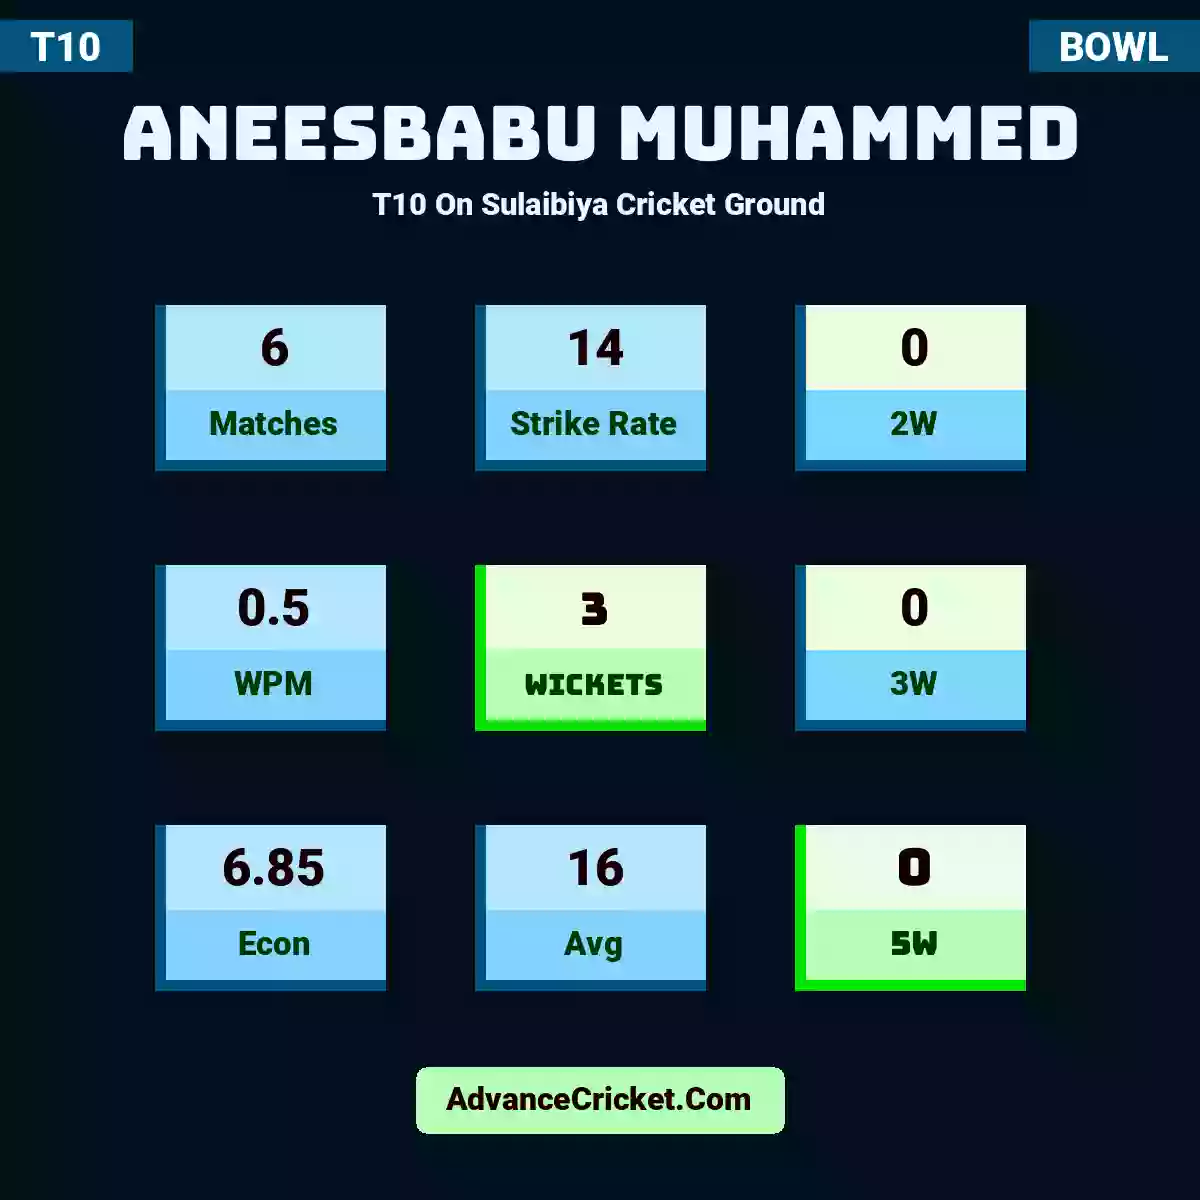 Aneesbabu Muhammed T10  On Sulaibiya Cricket Ground, Aneesbabu Muhammed played 6 match in this T10 mode, with a SR of 14. A.Muhammed took 0 2W, with a WPM of 0.5. Aneesbabu Muhammed secured 3 wickets, including 0 3W hauls, with an Econ of 6.85 and Avg of 16. Additionally, A.Muhammed achieved 0 5W ha